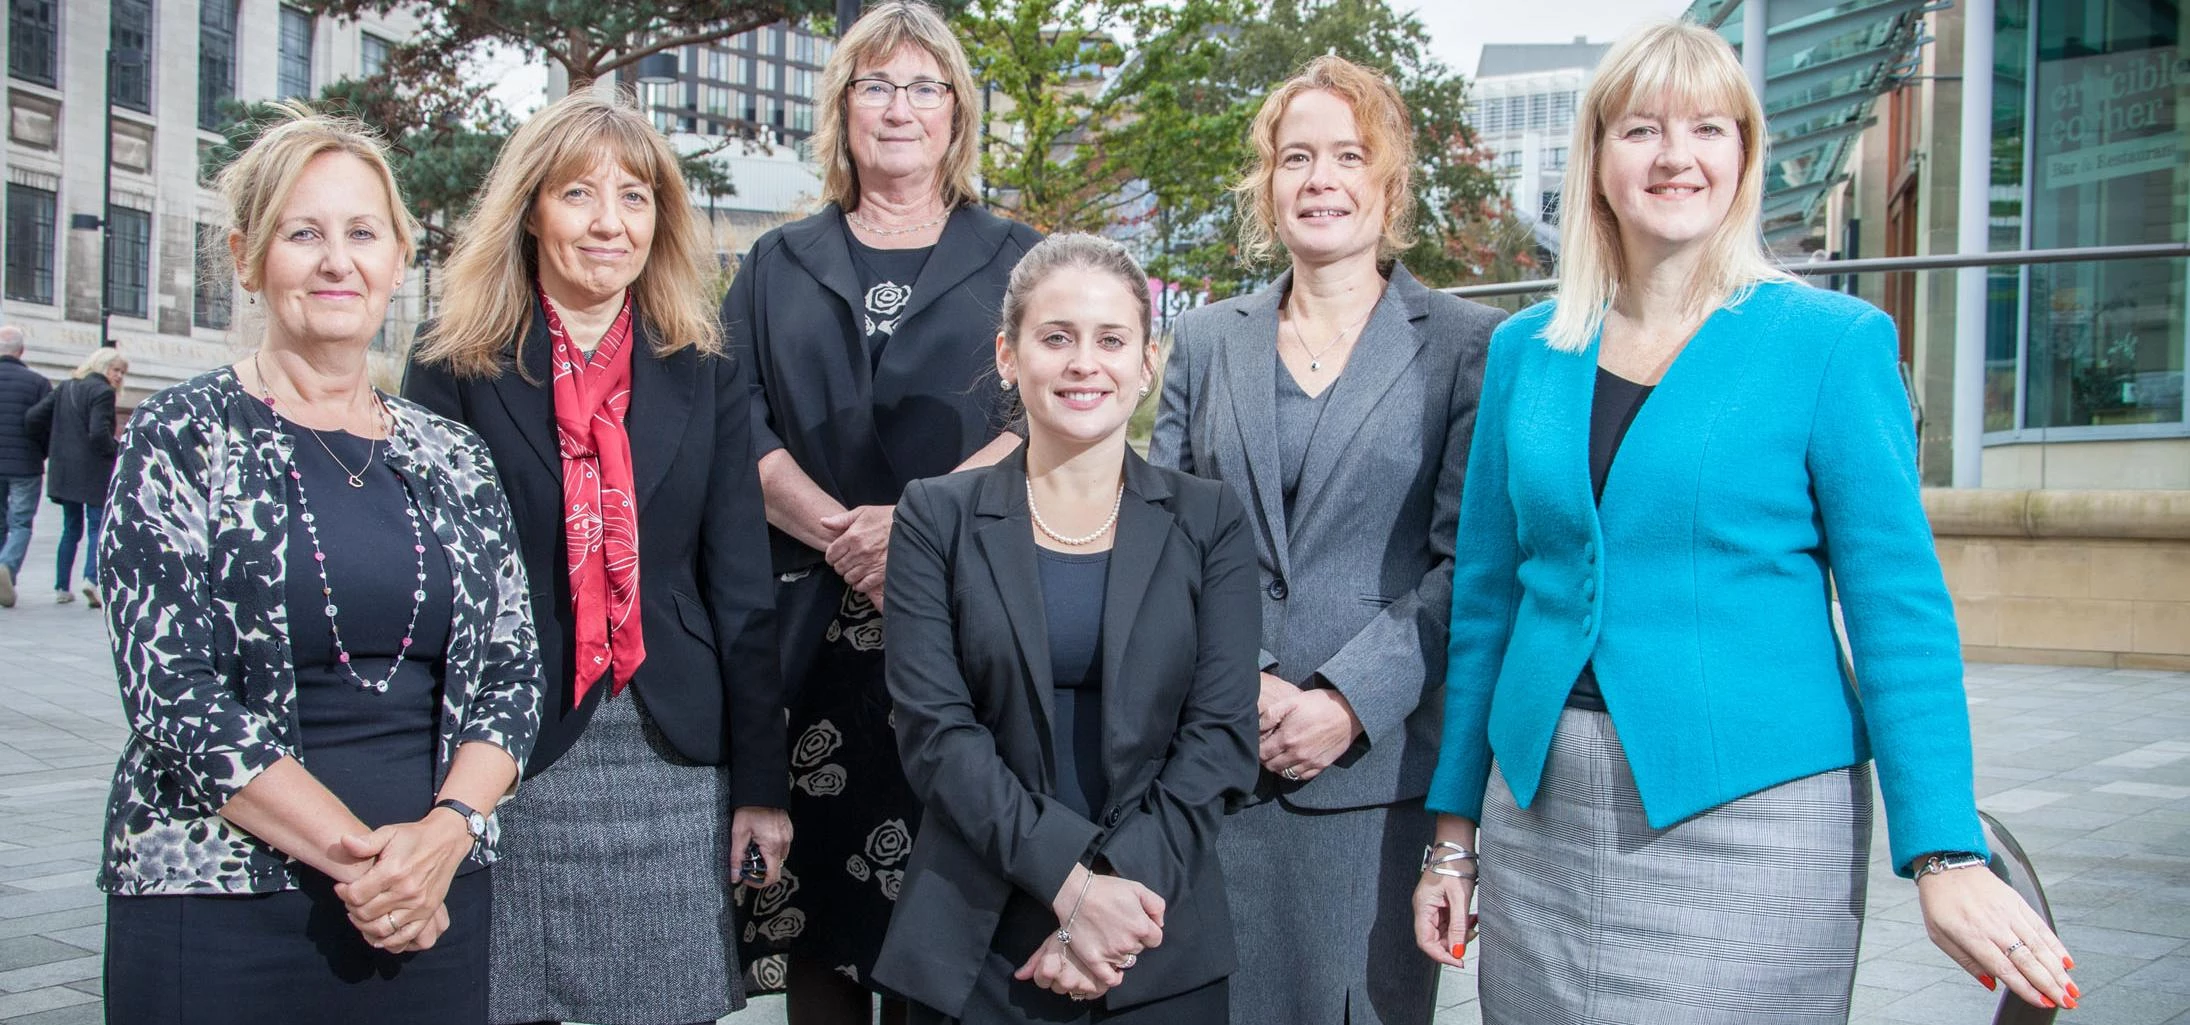 Michaela Heathcote (far right) and her family law team welcome Emilie Garthwaite (centre) to Taylor&